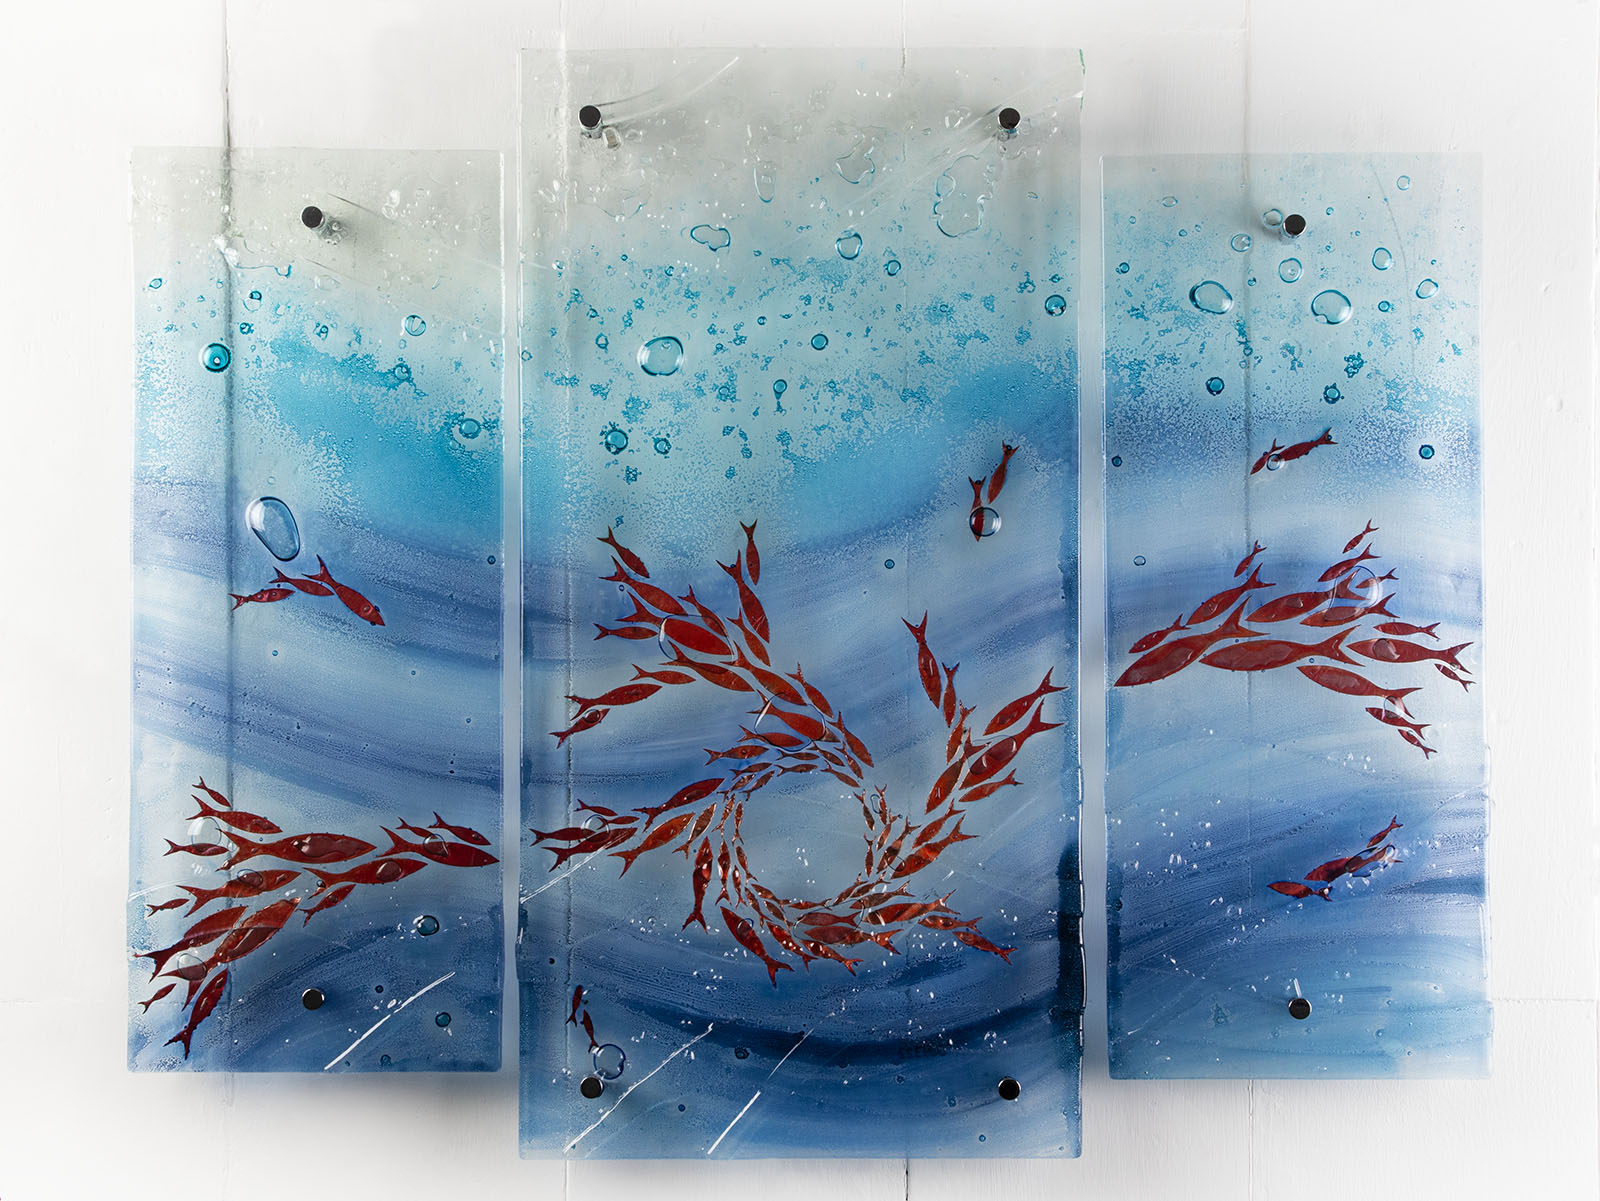 Artisan Lucid Currents Staggered Triptych